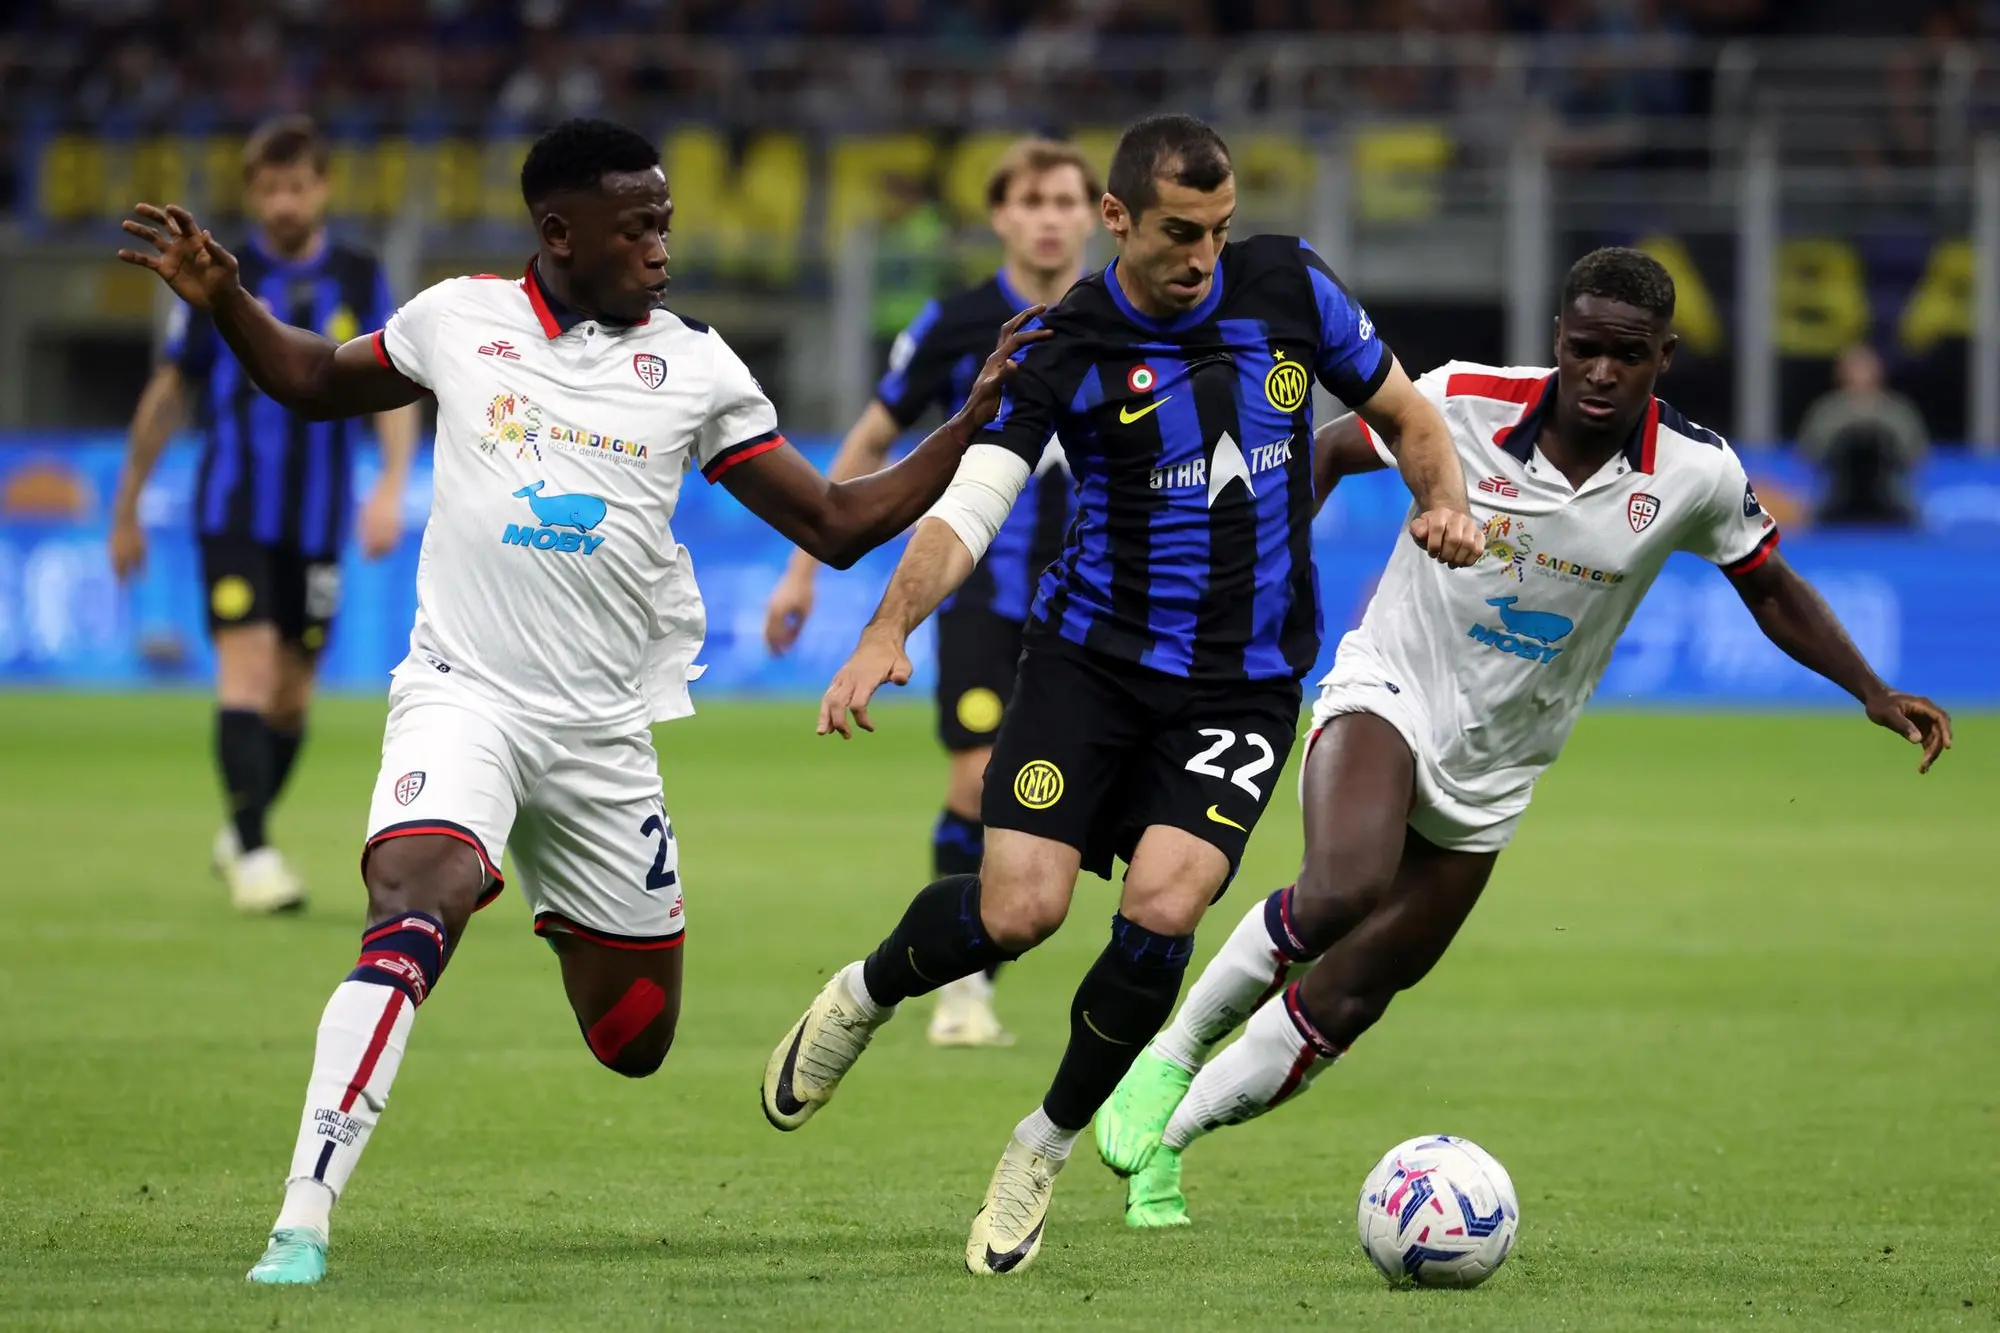 Inter Milan’s Henrih Mkhitaryan (C) challenges for the ball with Cagliari's Zito Luvumbo (R) ands teammate Ibrahim Sulemana during the Italian serie A soccer match between Fc Inter and Cagliari at Giuseppe Meazza stadium in Milan, 14 April 2024. ANSA / MATTEO BAZZI